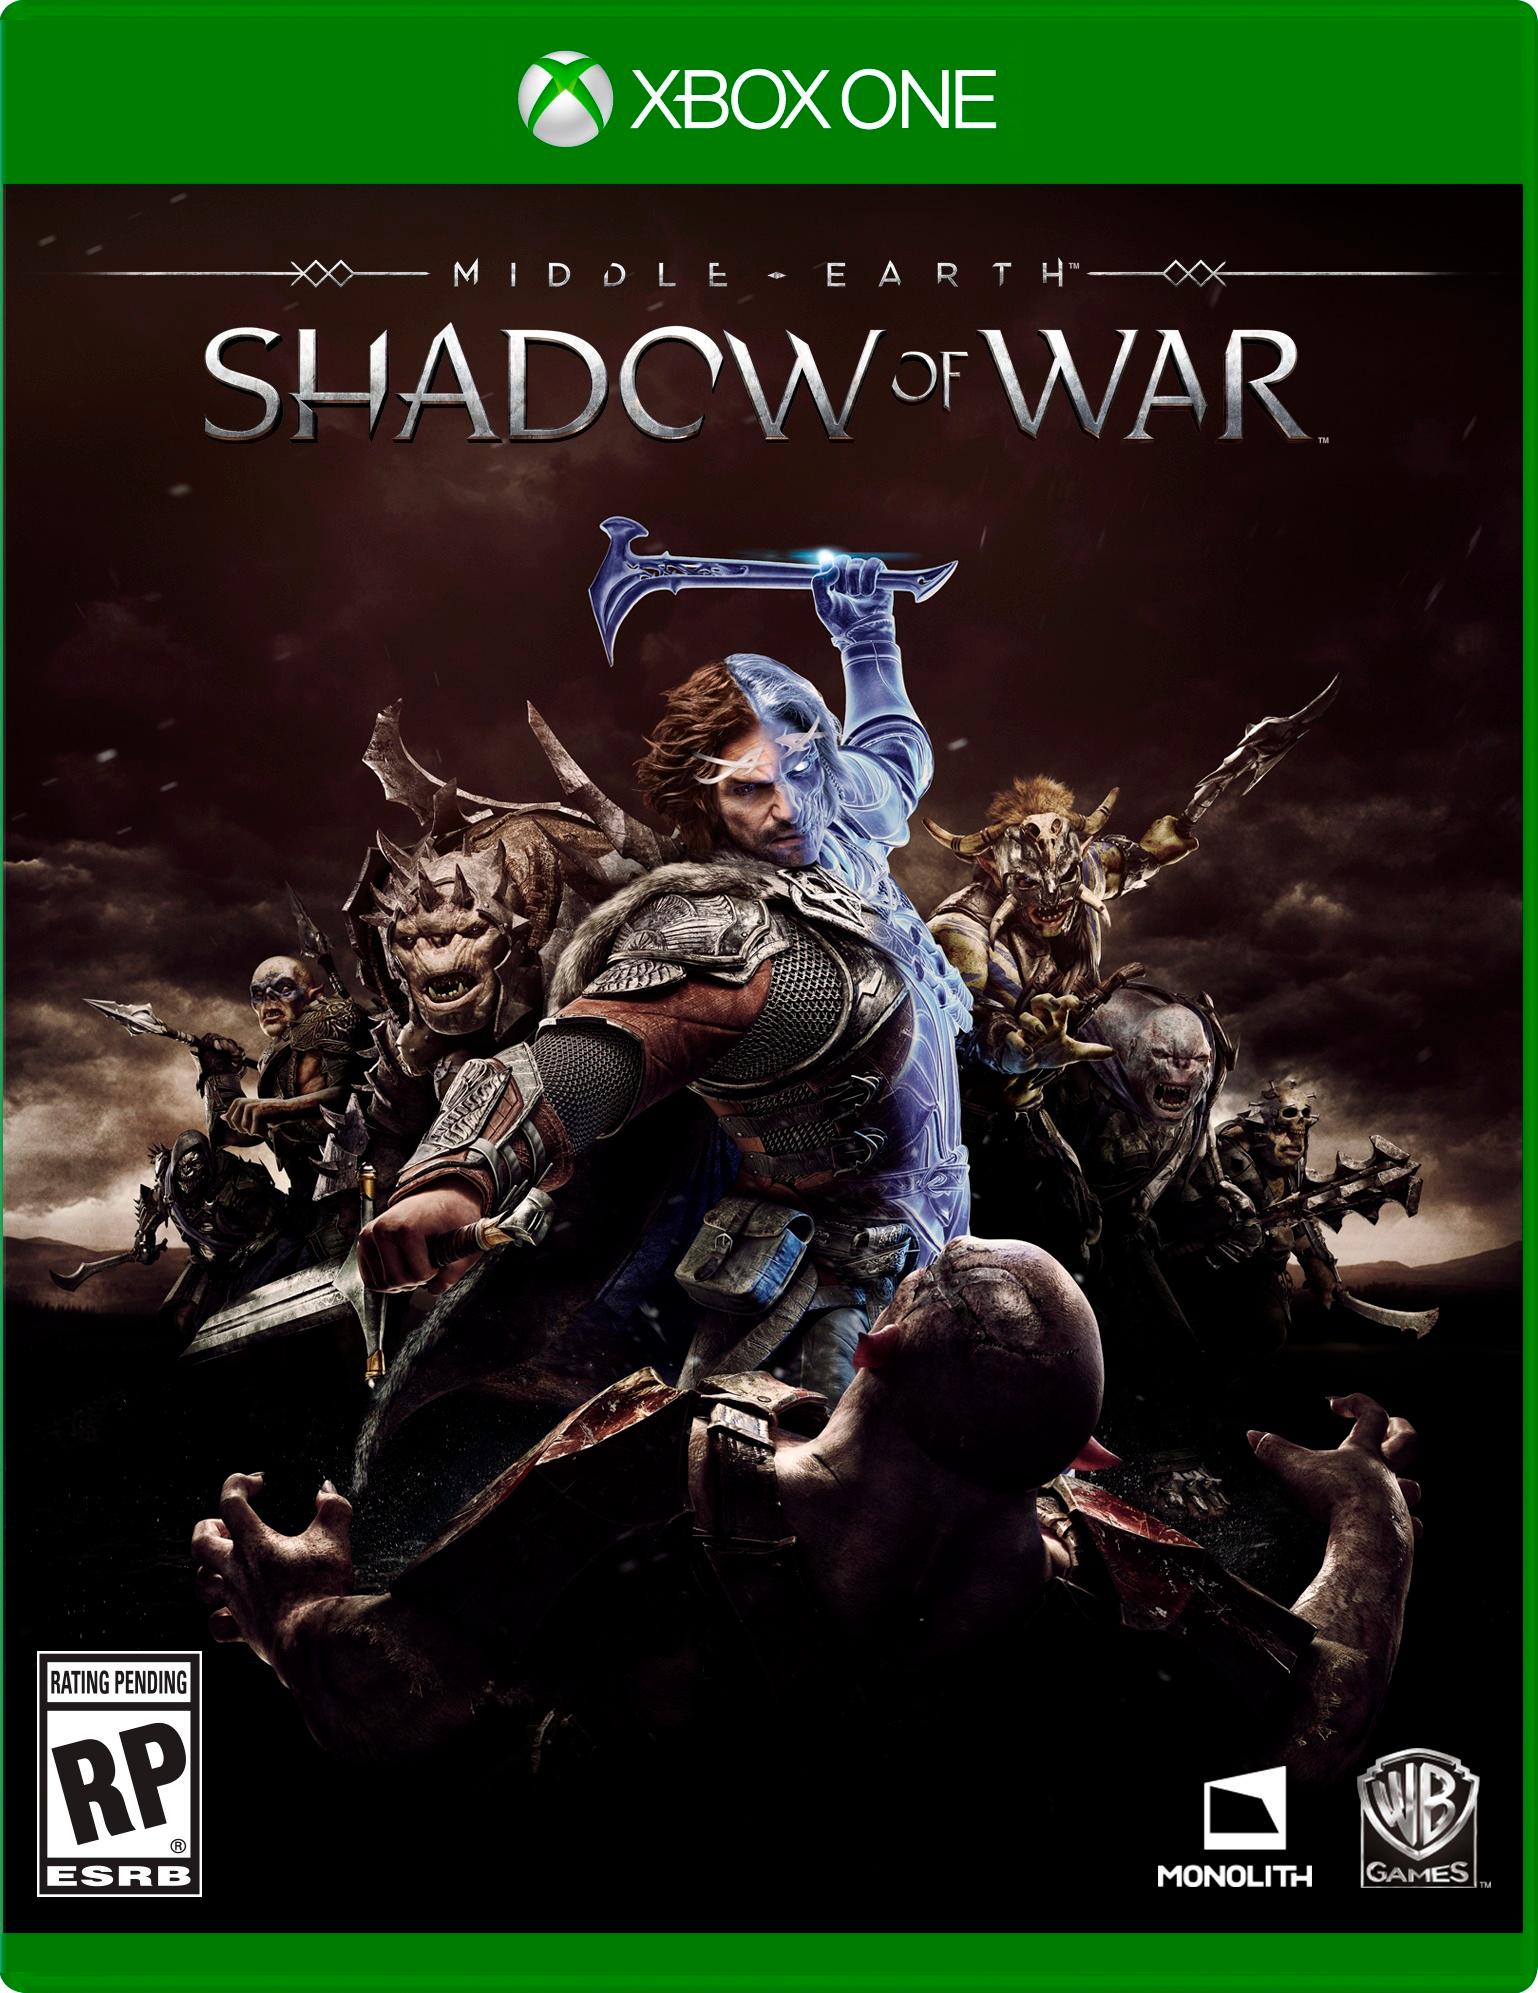 Middle-Earth: Shadow Of War Definitive Edition - Xbox One 